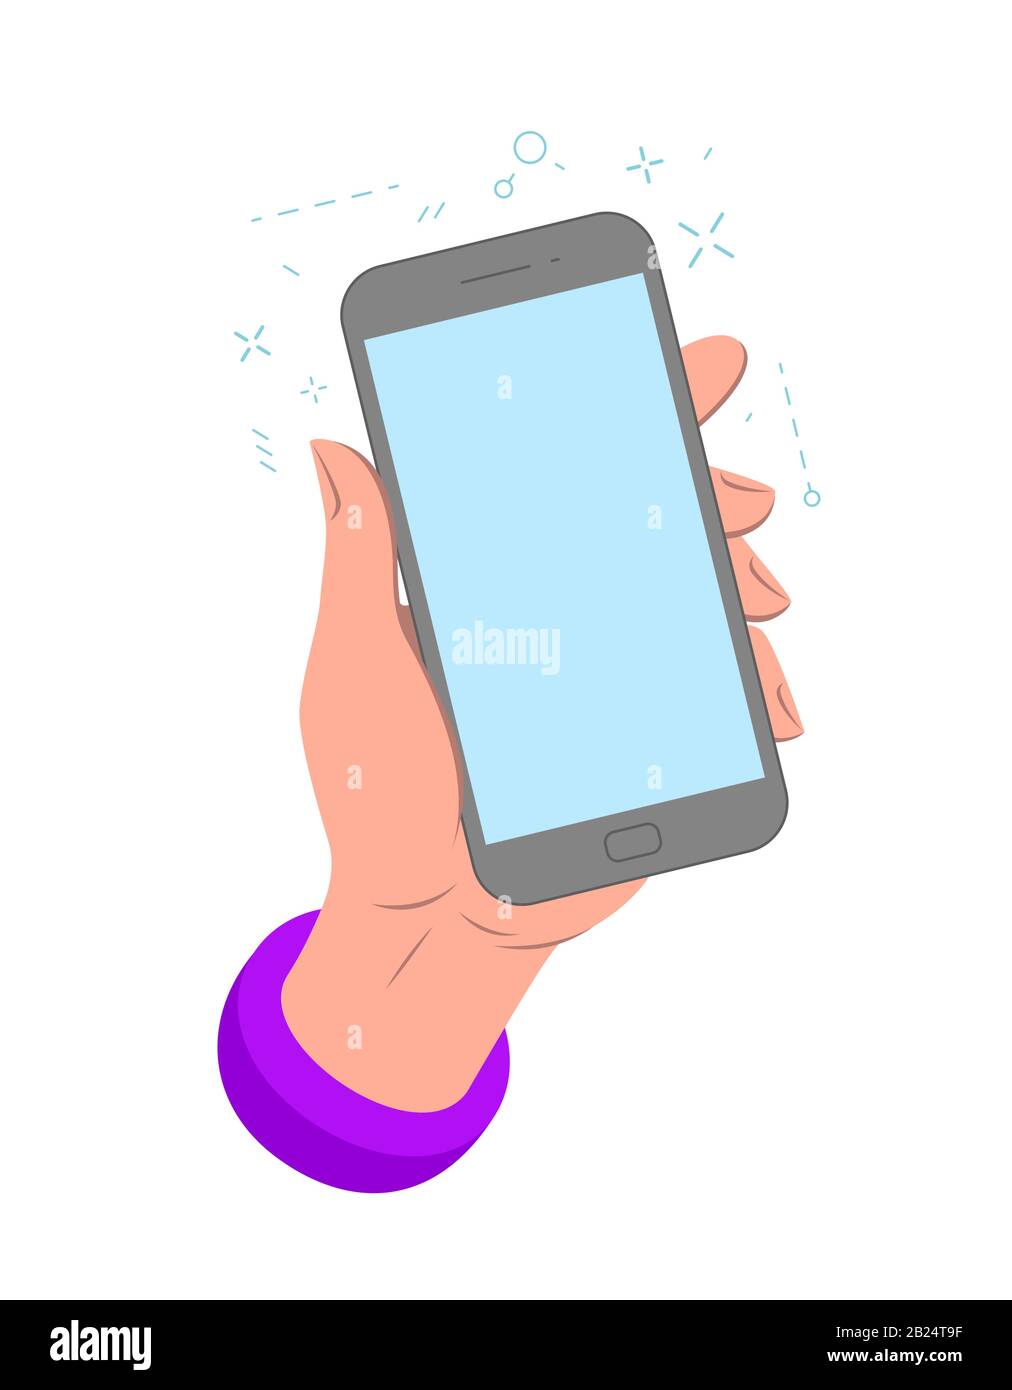 Smartphone in hand template for web and mobile applications. Vector illustration Stock Vector